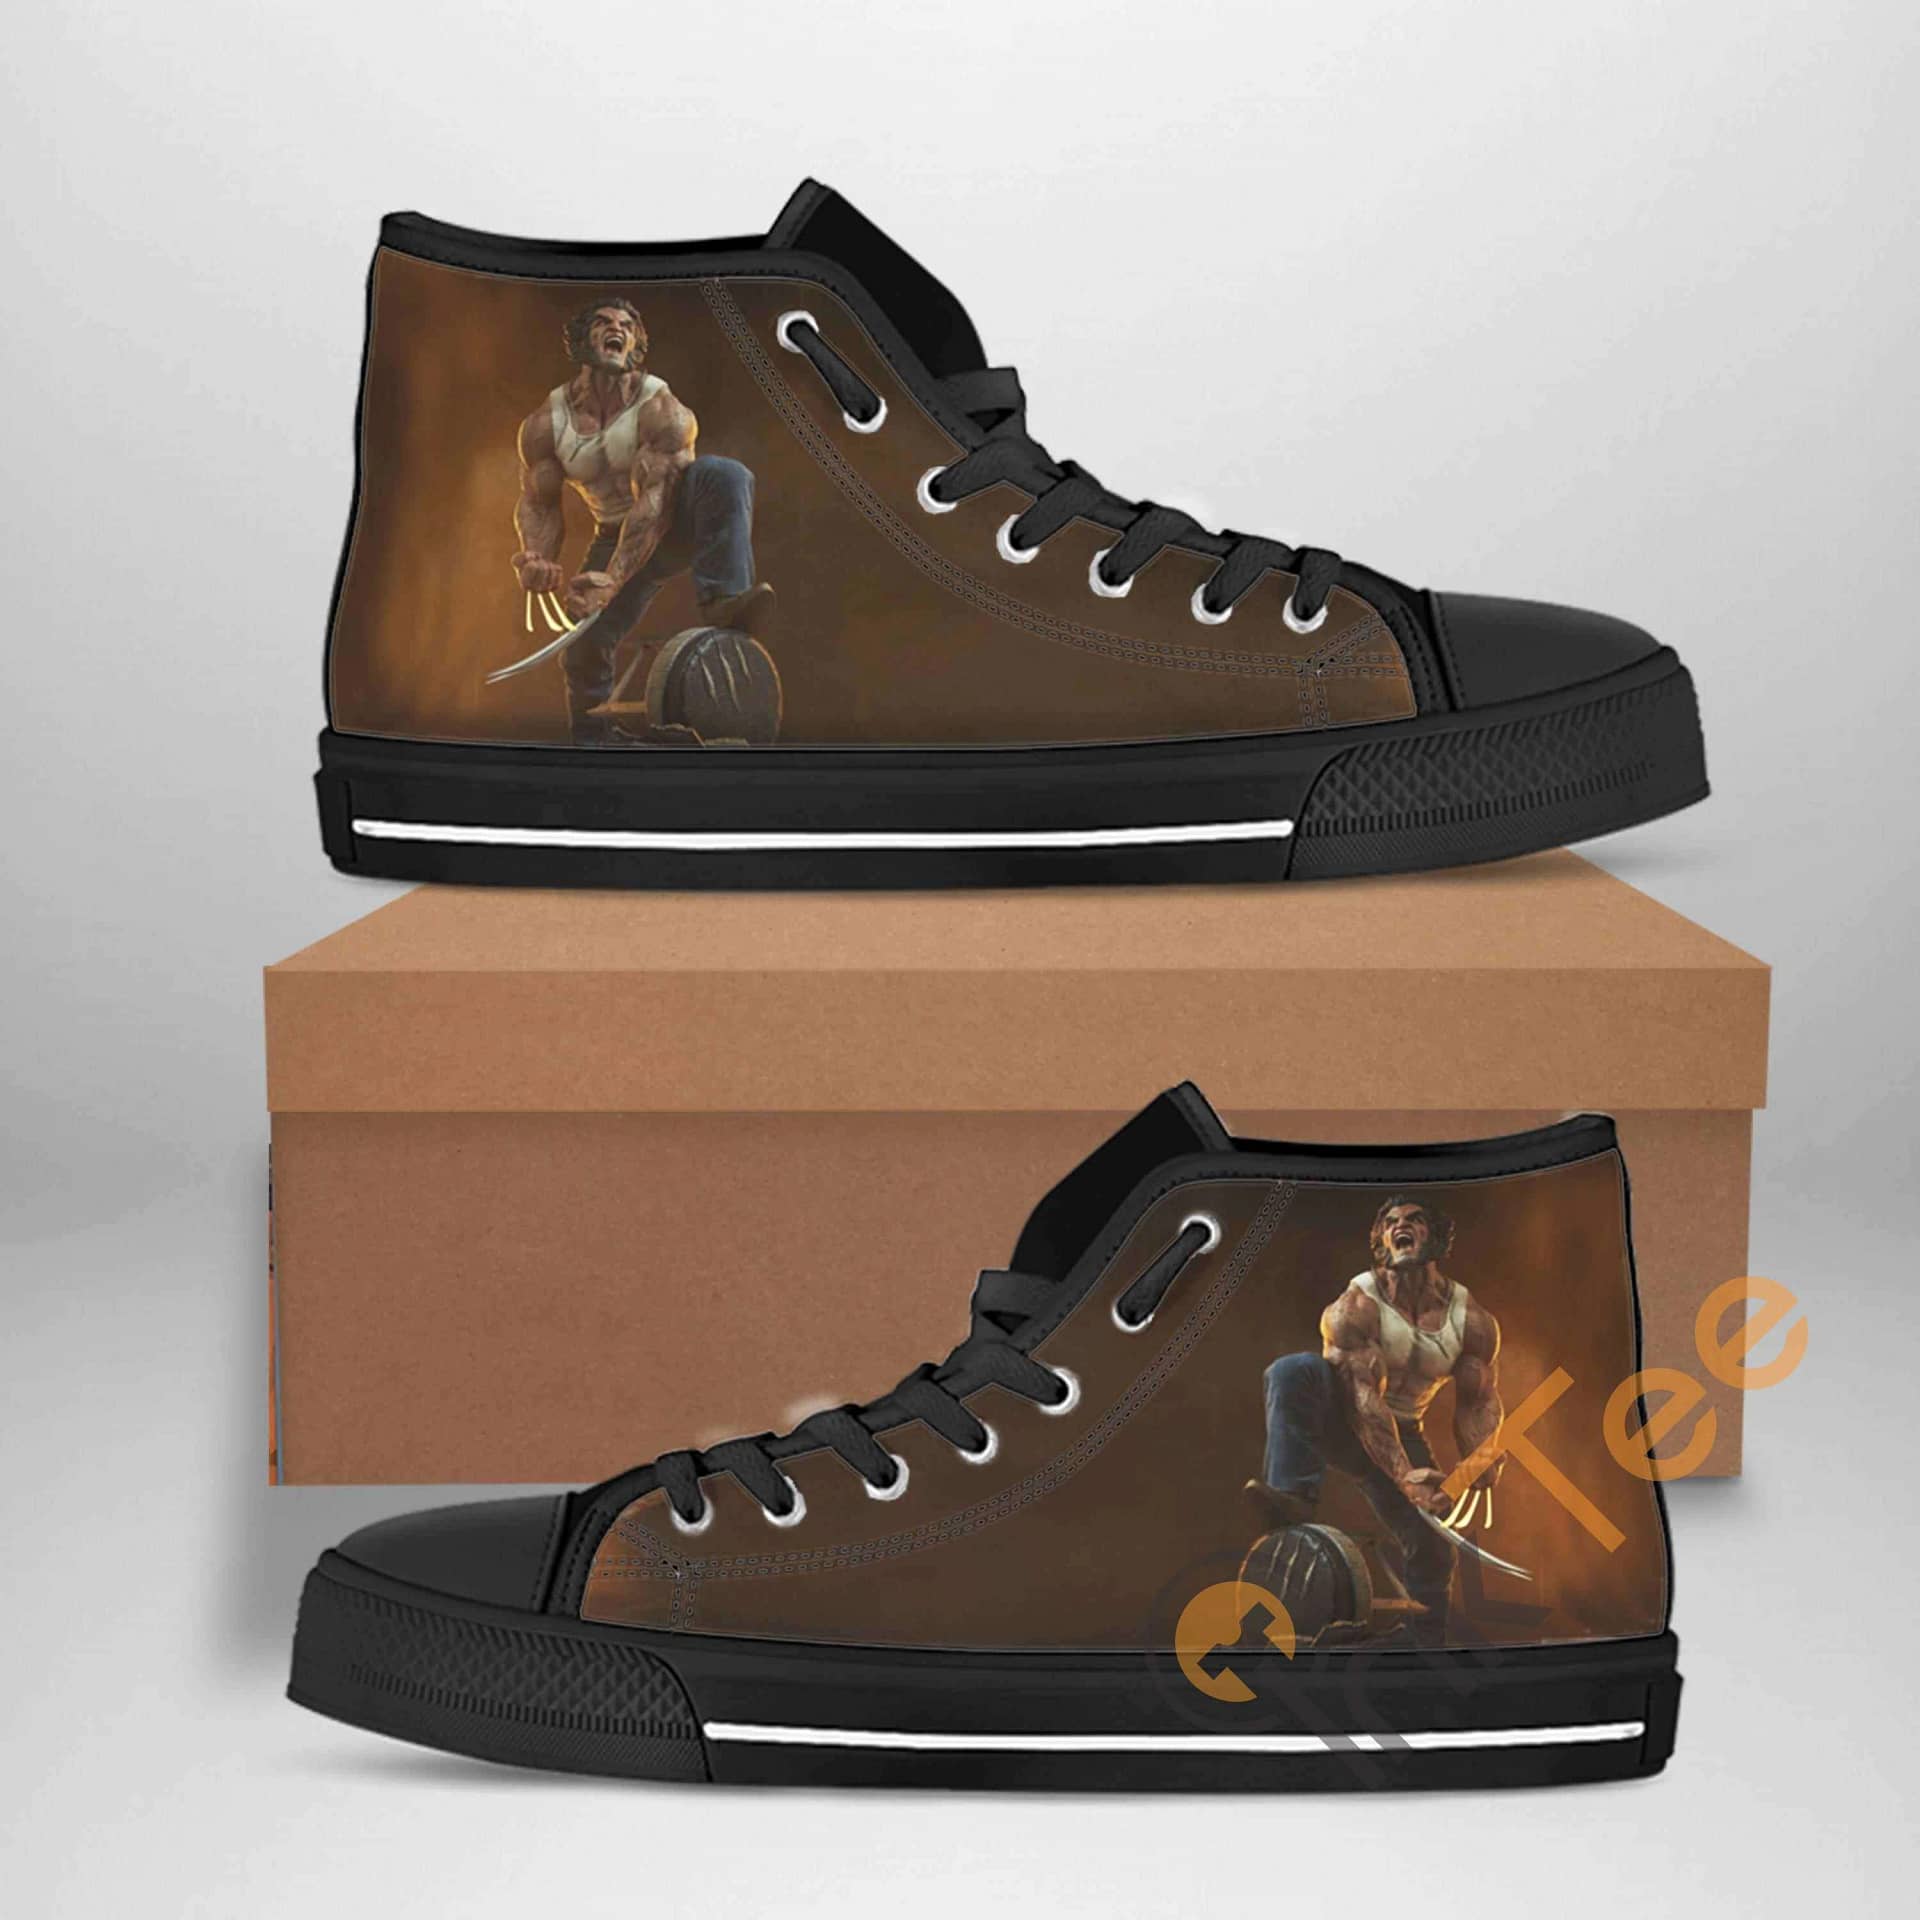 Wolverine Best Movie Character Amazon Best Seller Sku 2554 High Top Shoes